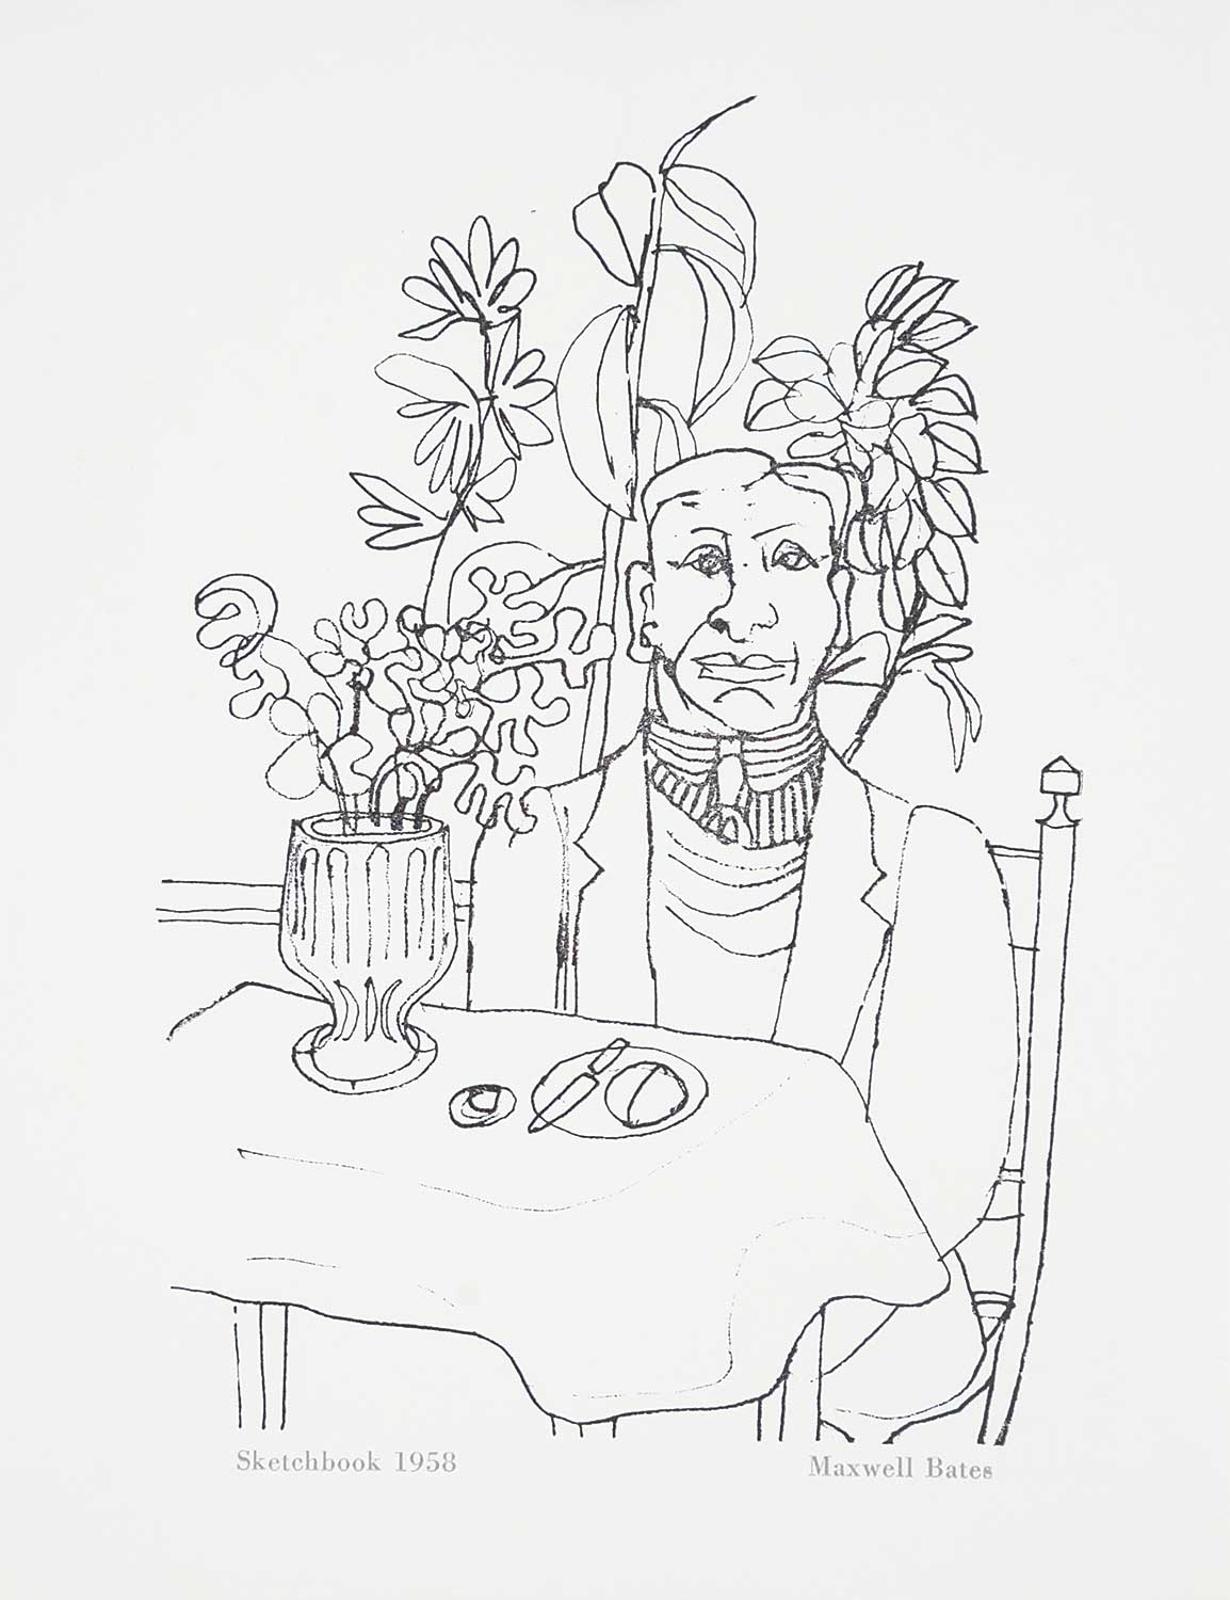 Maxwell Bennett Bates (1906-1980) - Sketchbook 1958 [Man at a Table with Plants]